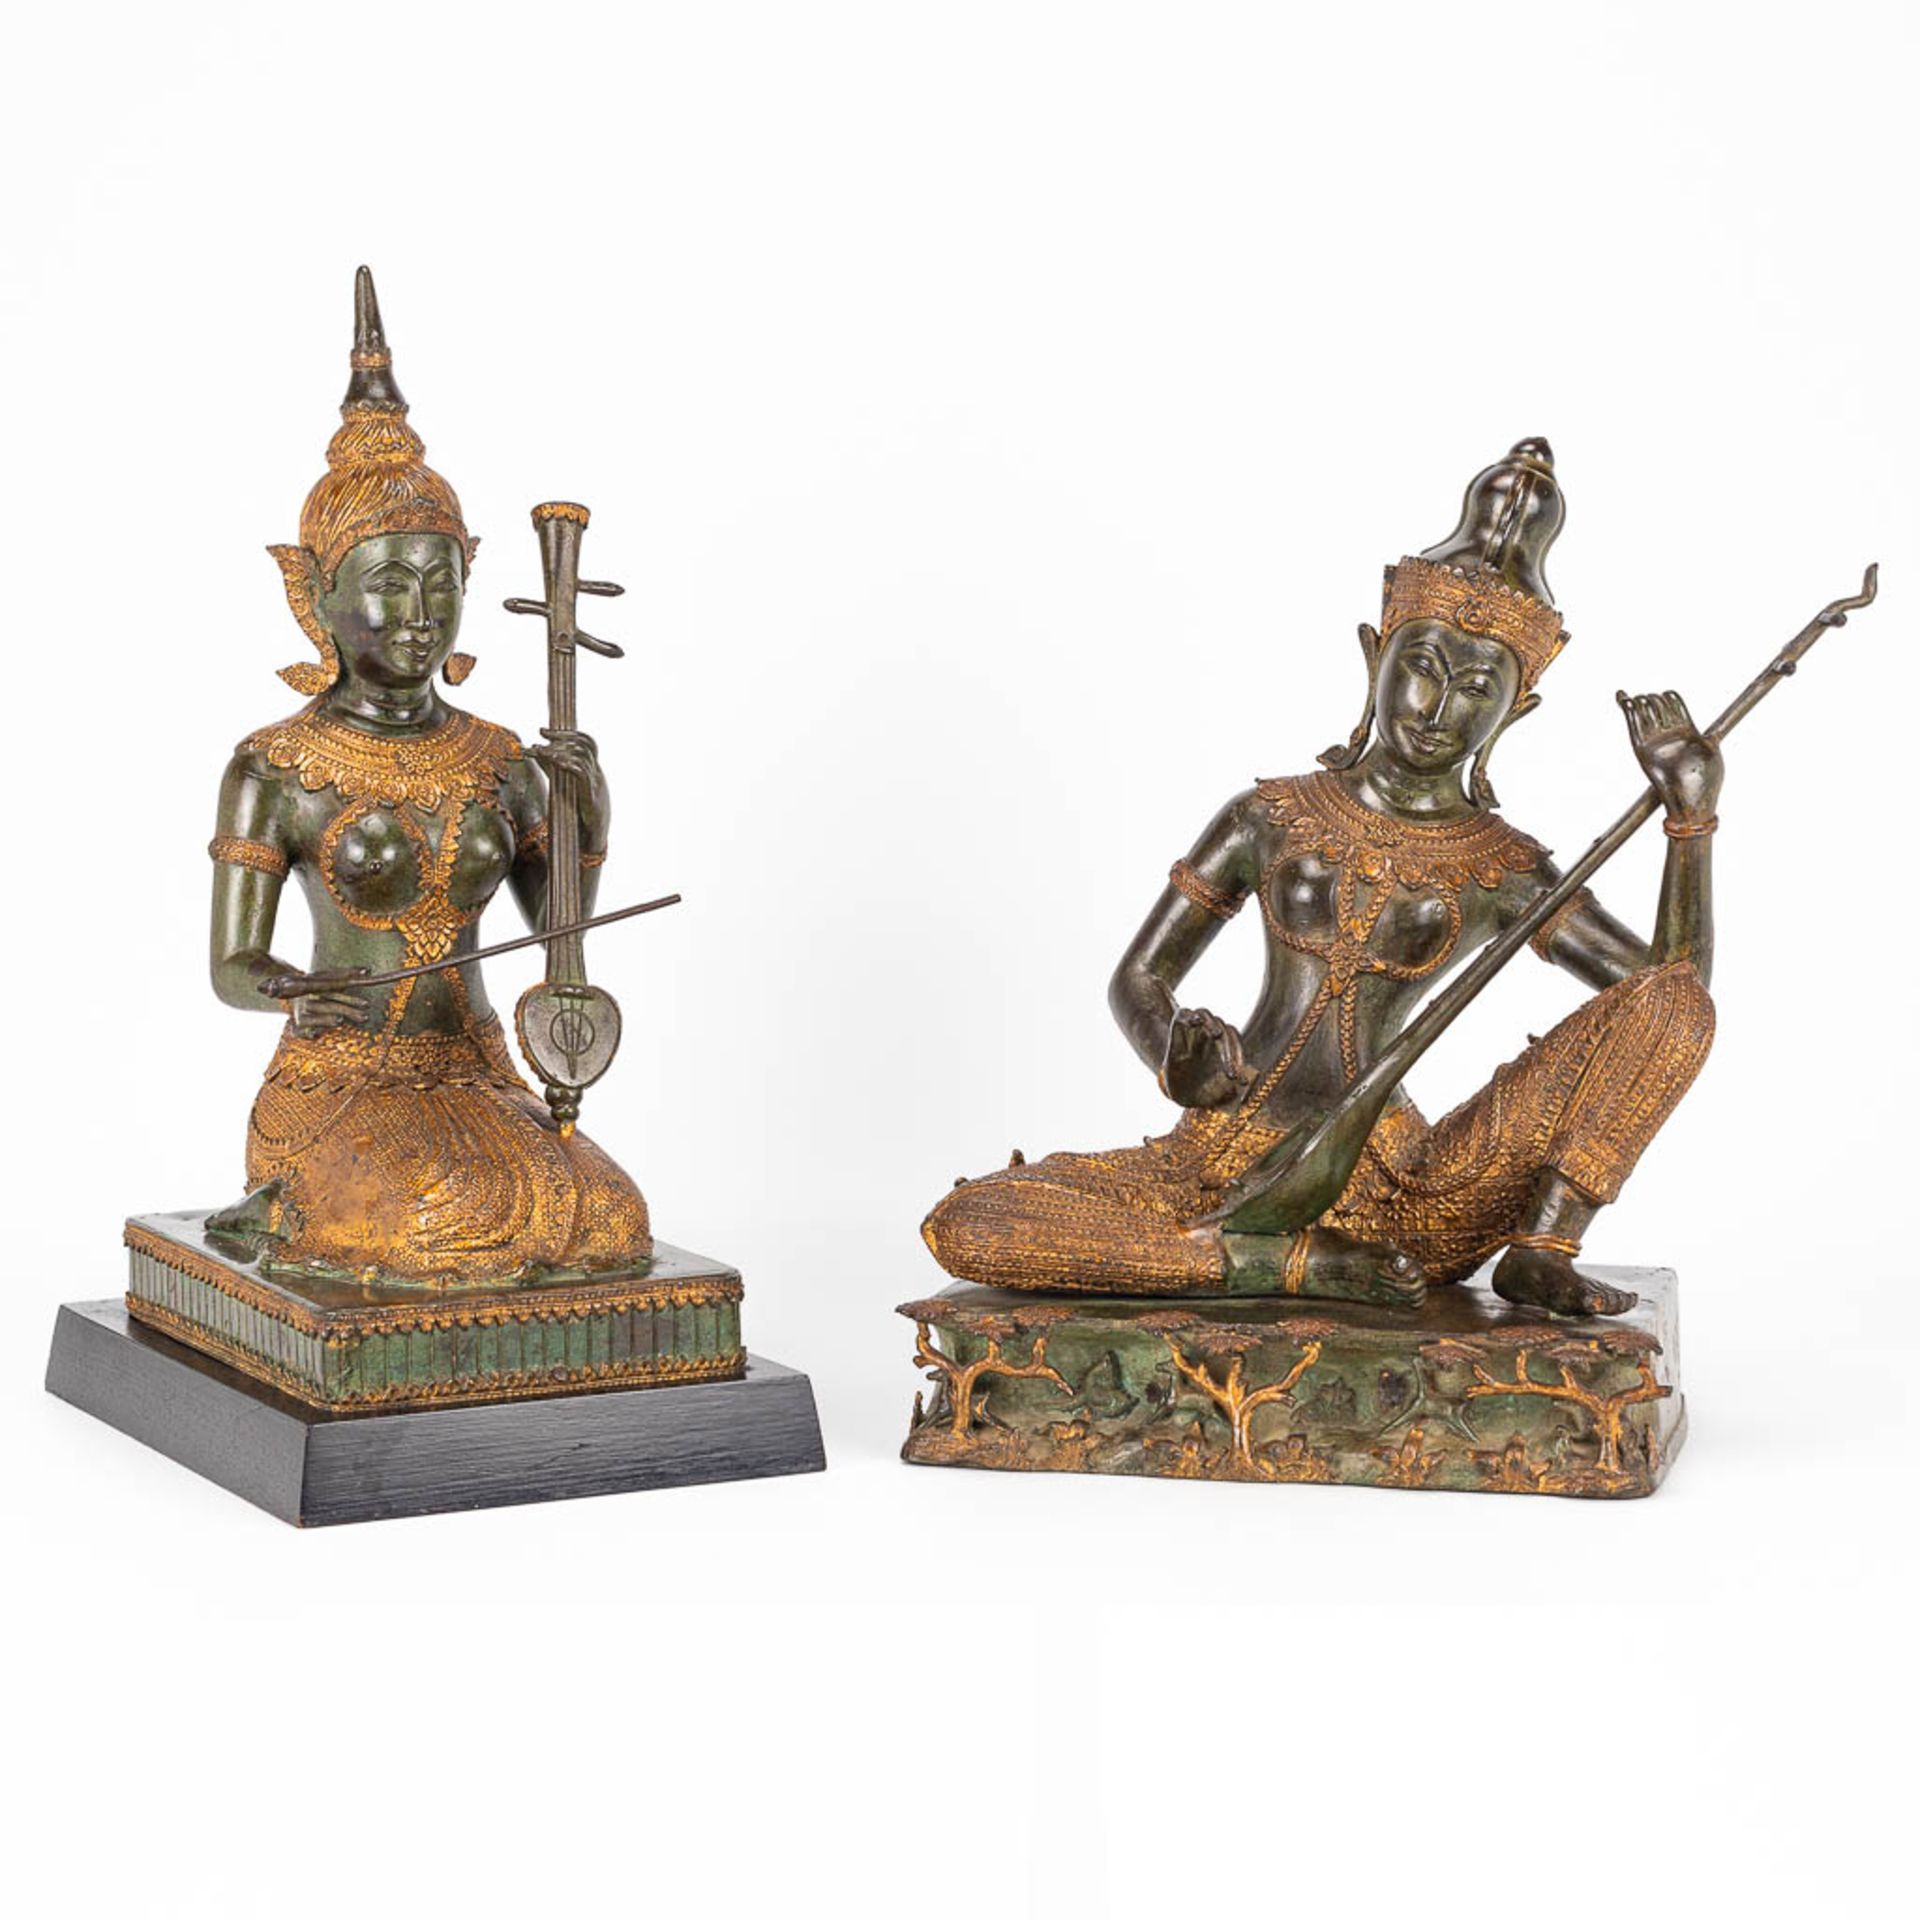 A collection of 2 oriental musical buddha's, made of metal.